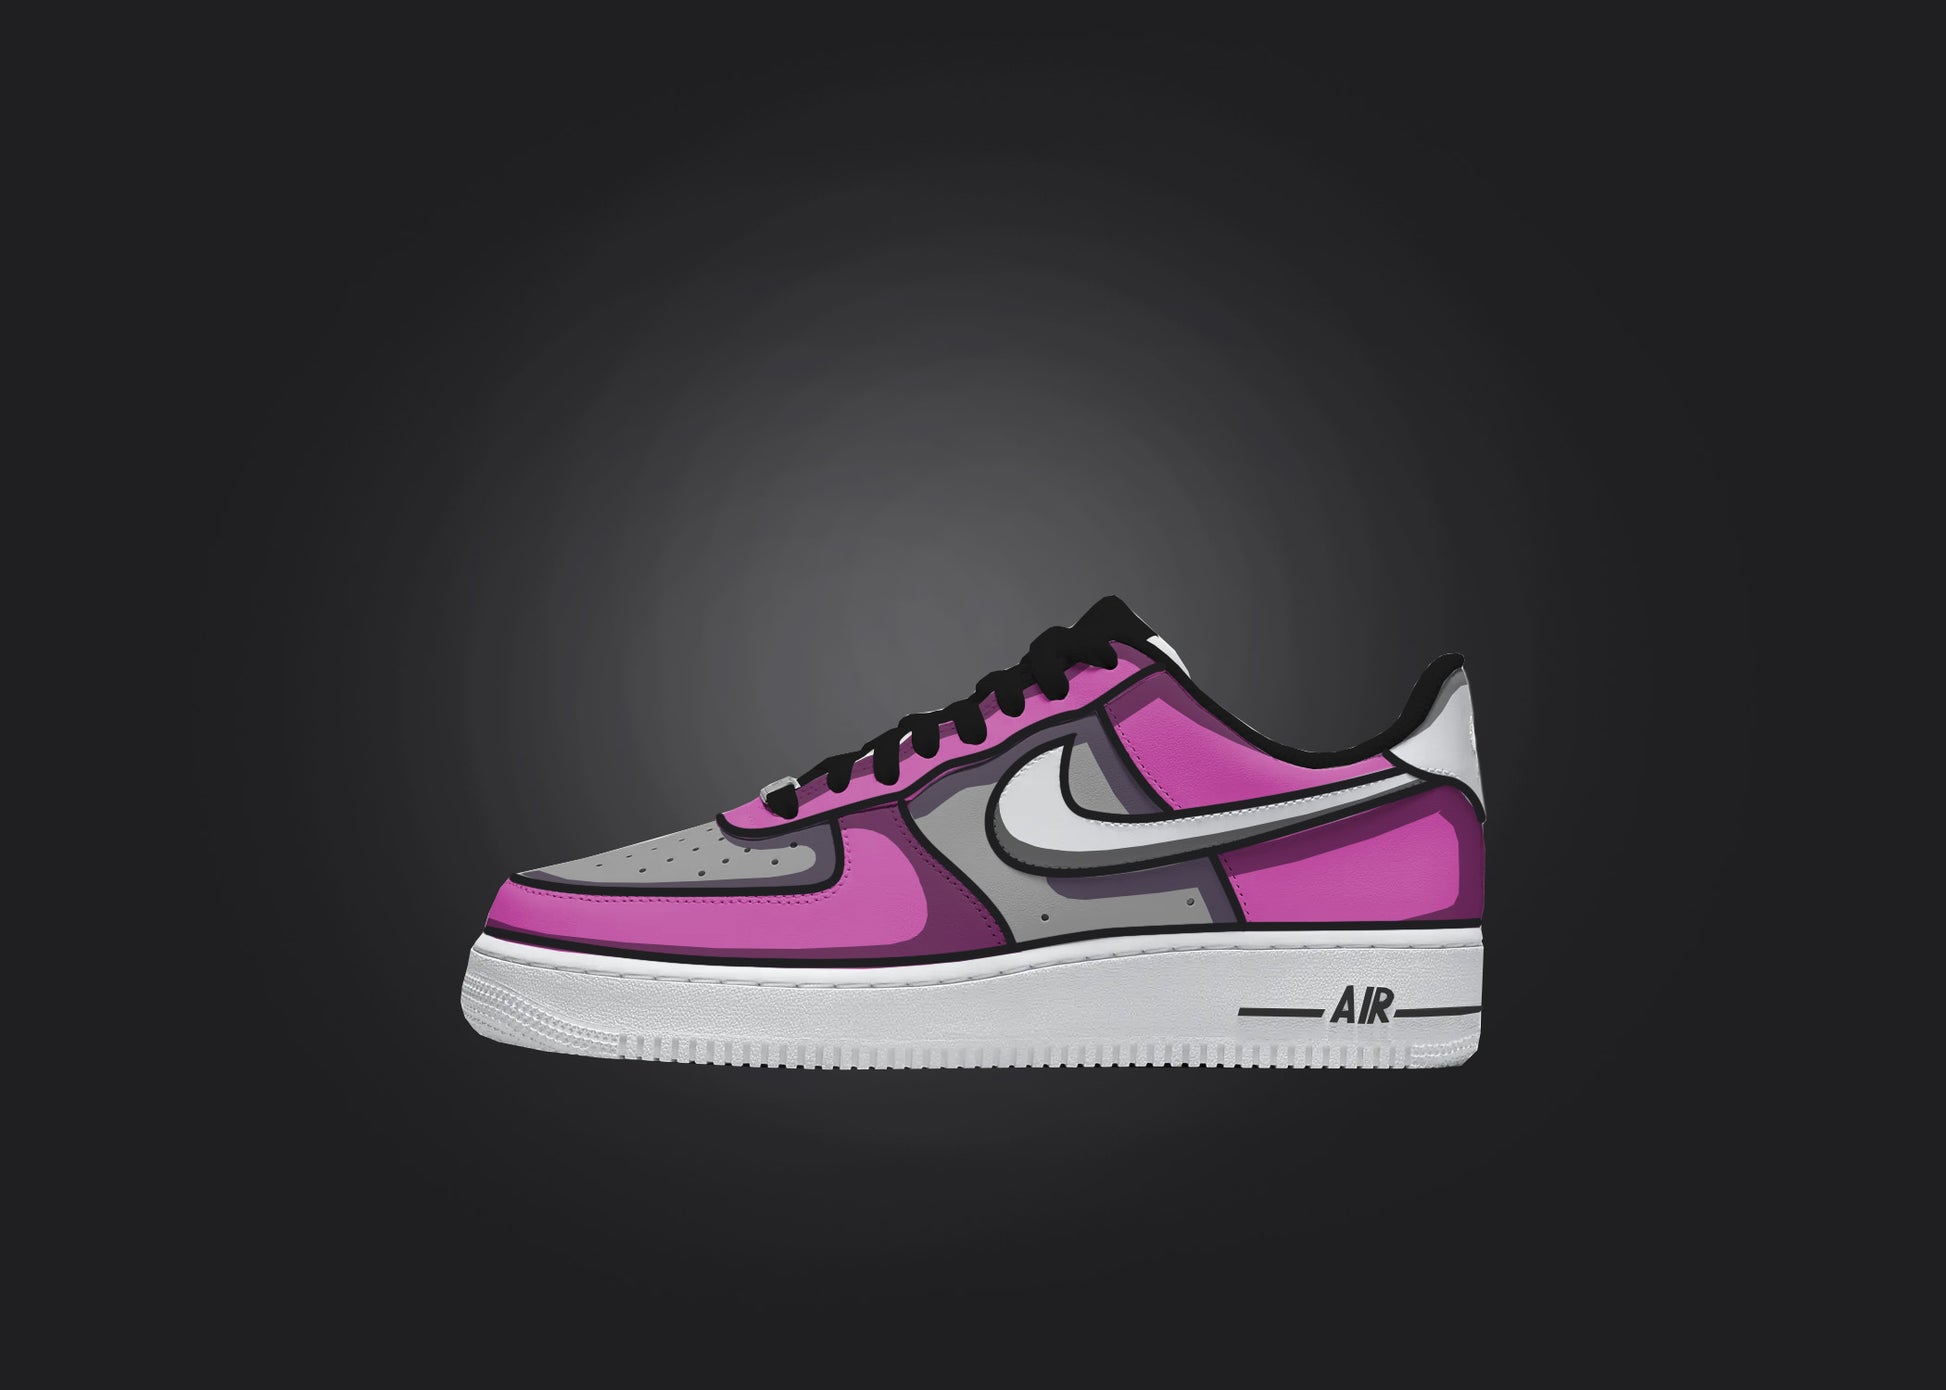 Single Custom Air Force 1 sneaker in shades of pink and gray against a black background, showcasing the detailed cartoon shading.